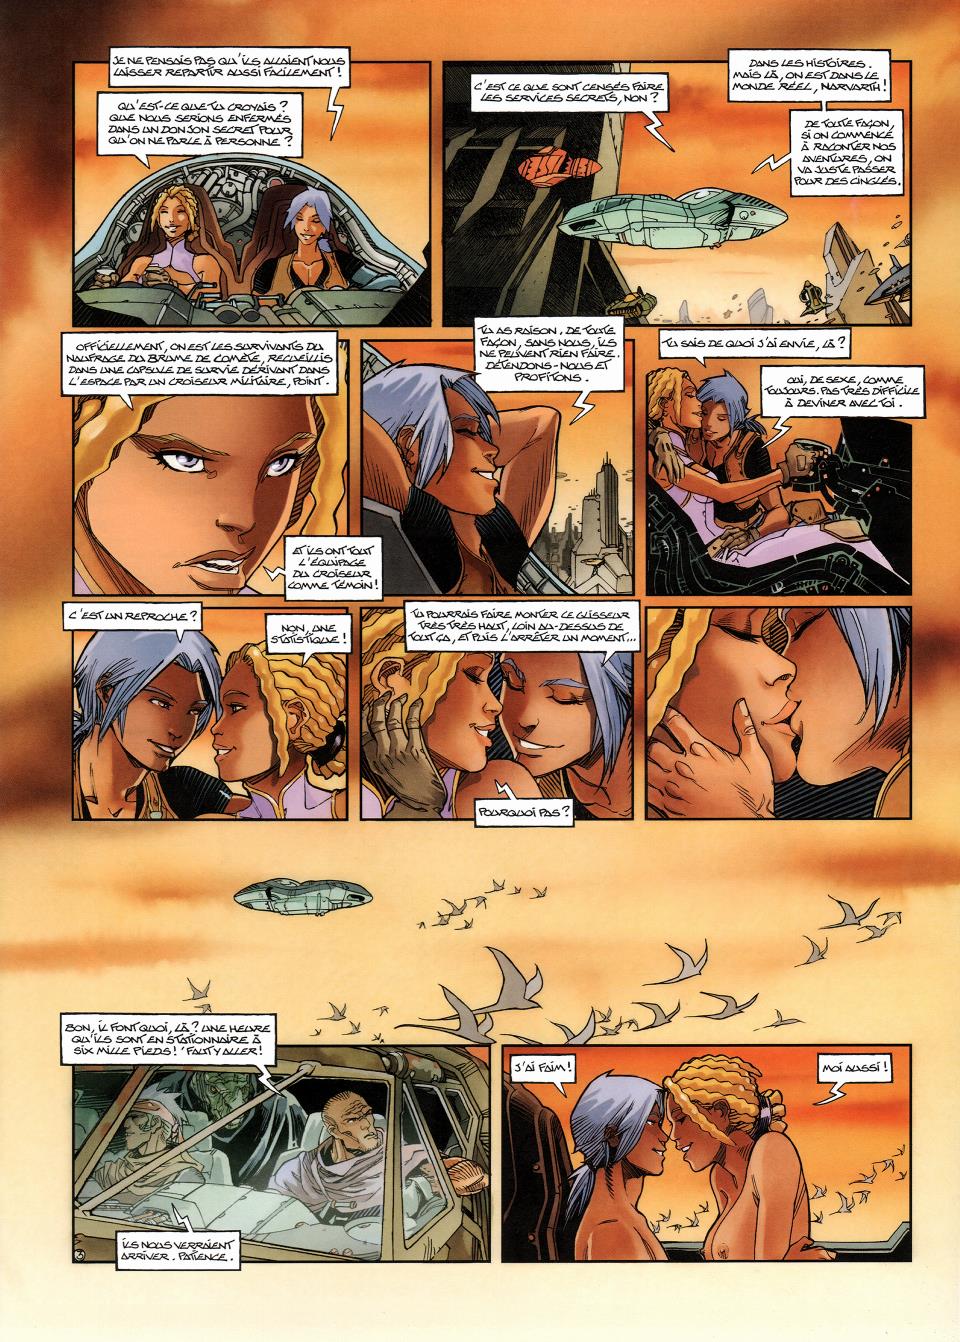 Les Naufrages dYthaq - Tome 10 - Nehorf-Capitol Transit numero d'image 5